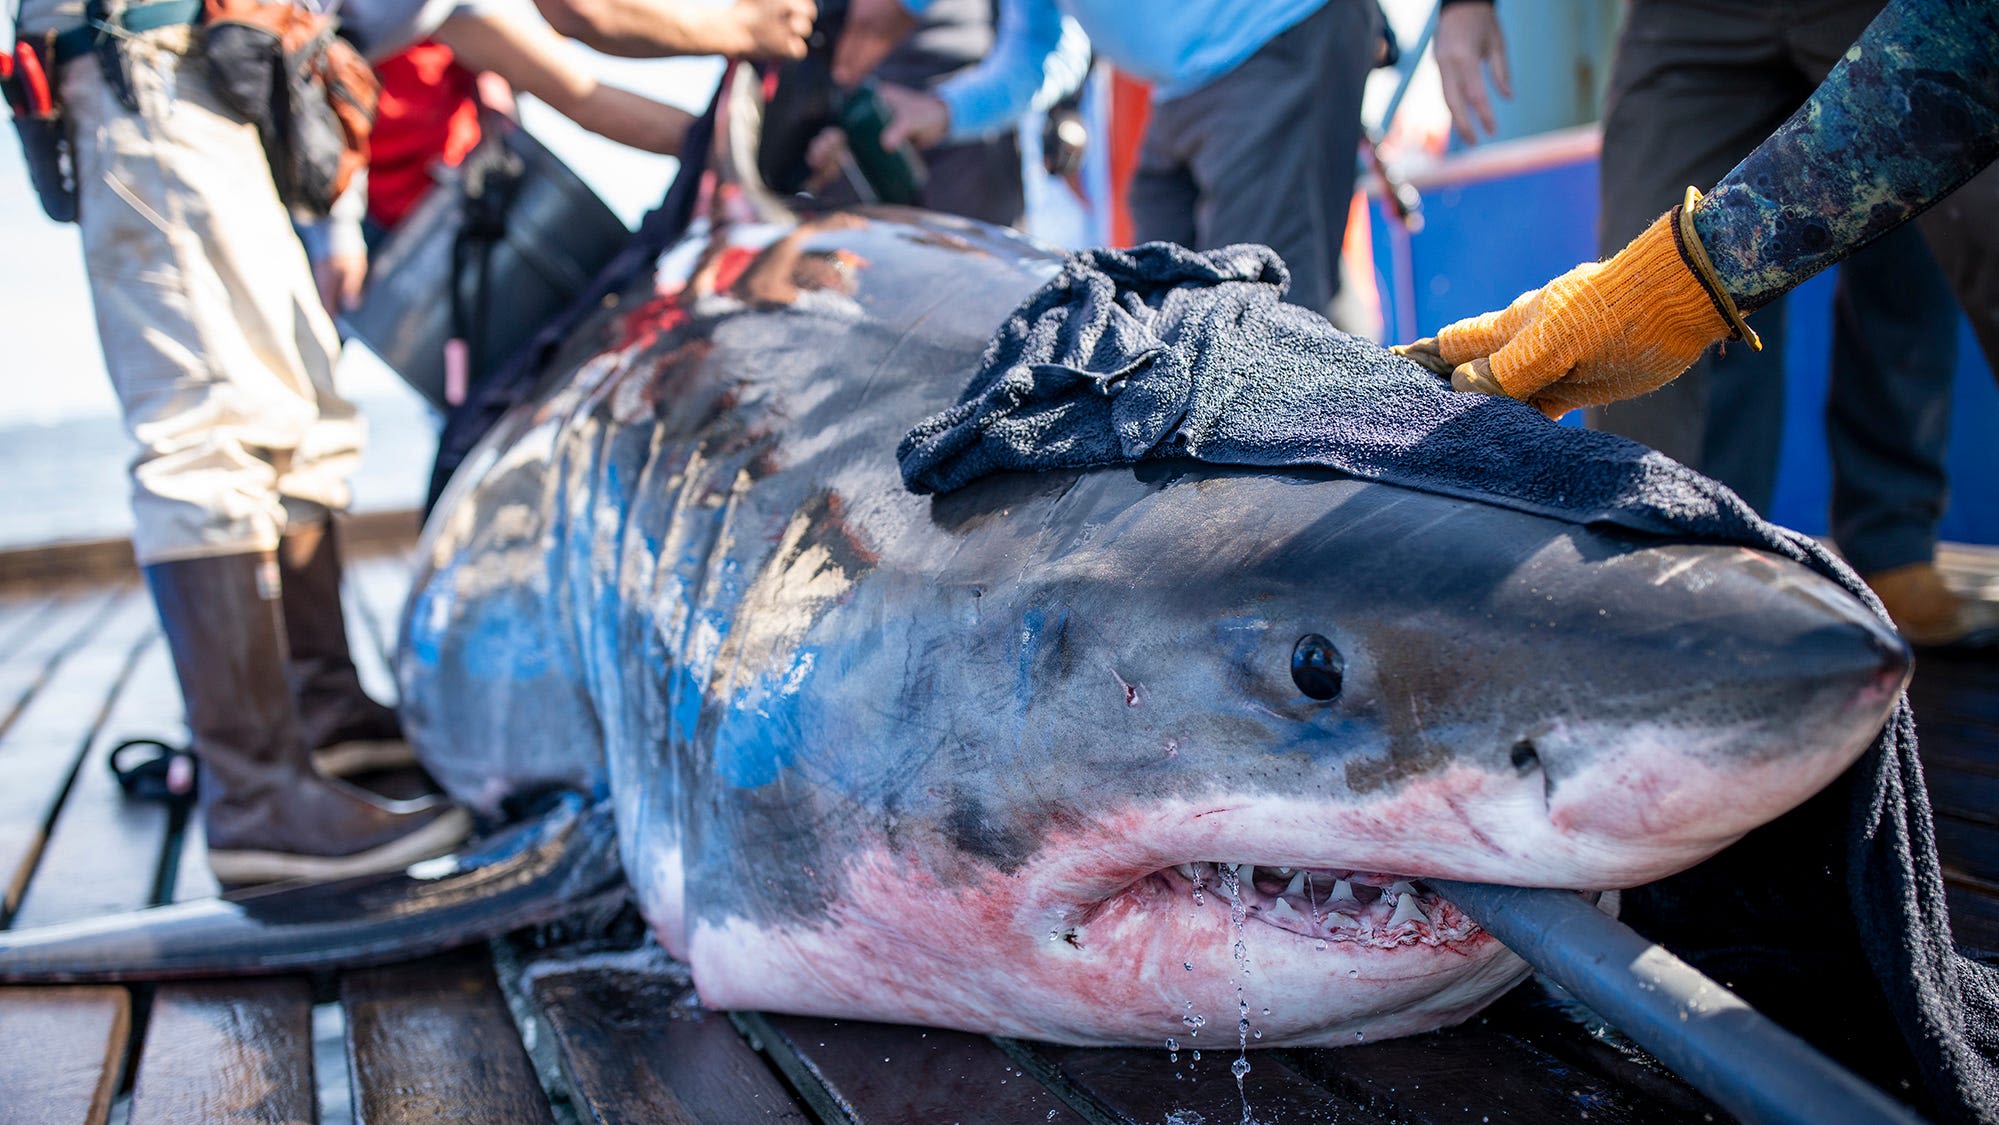 After Shark Week, great white shark visits Juno Beach. 5 facts on these predatory fish